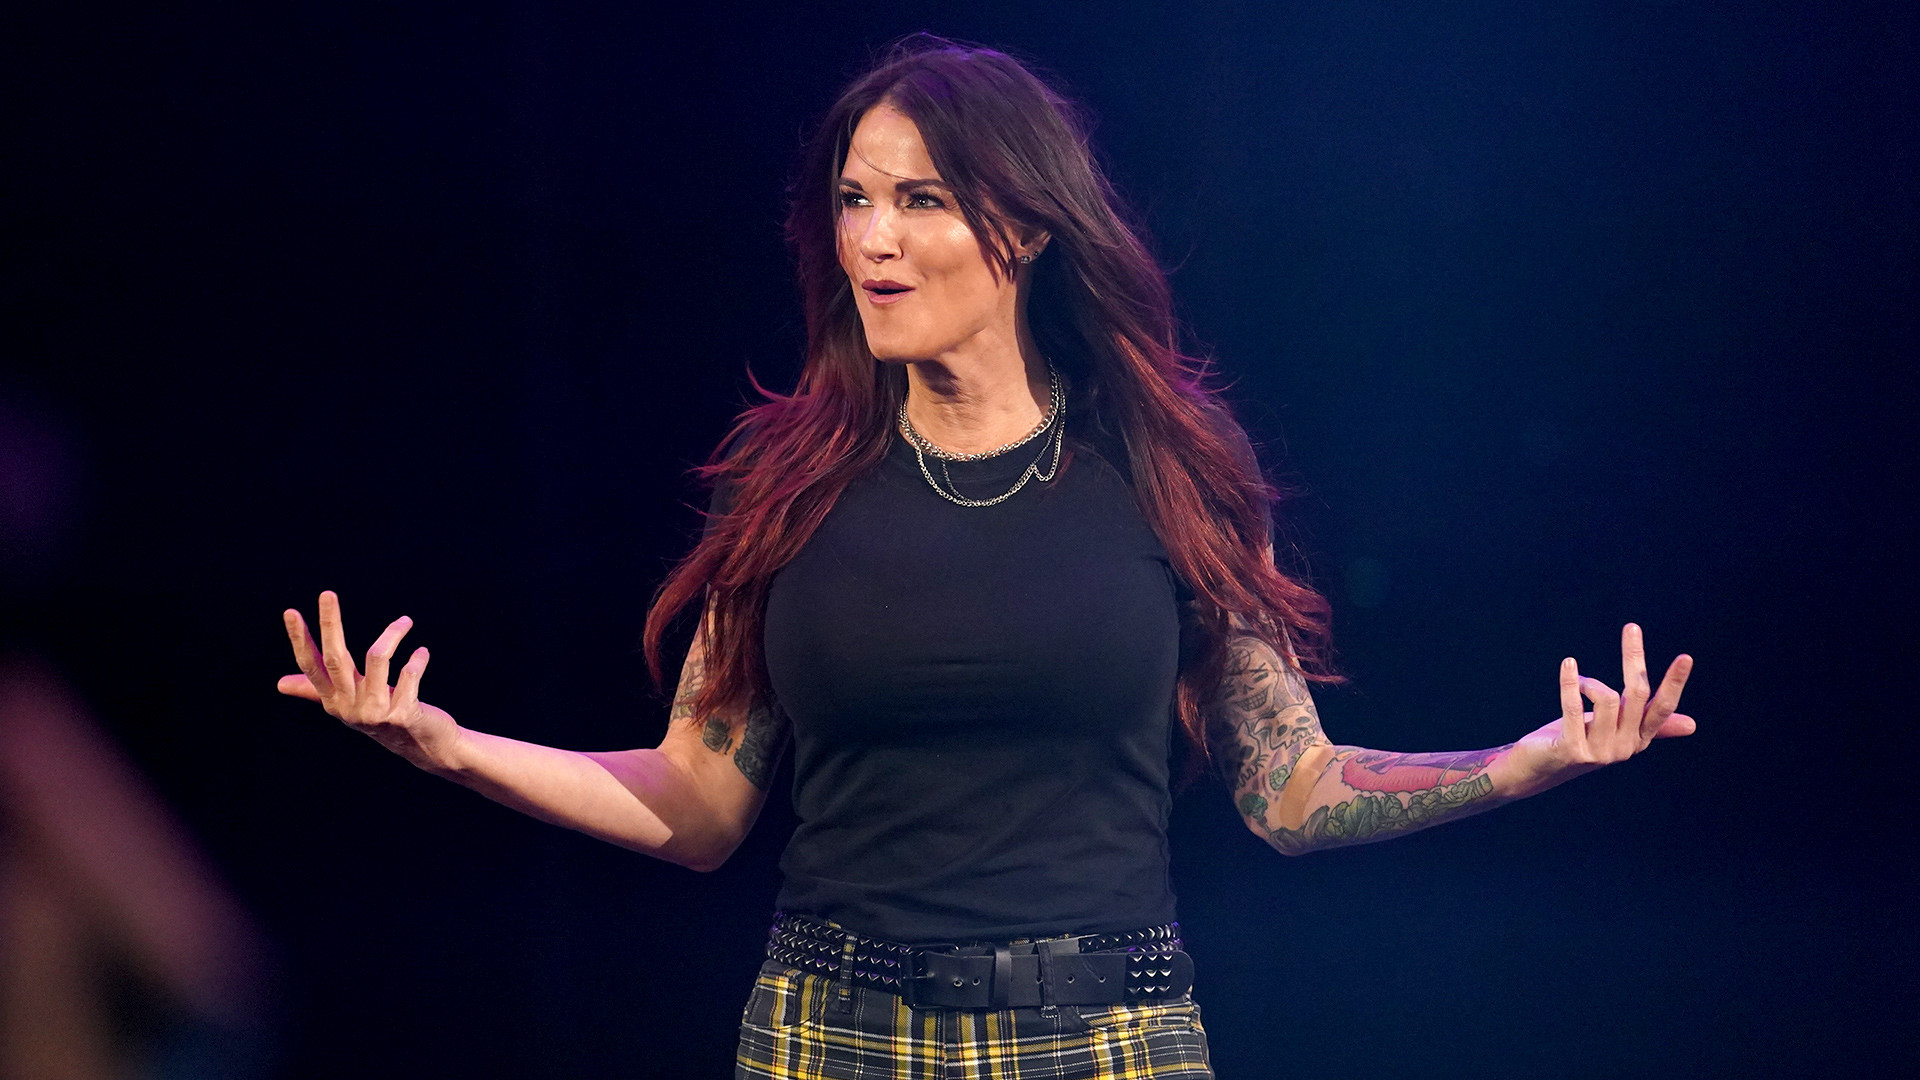 Lita Returned After Alexa Bliss Amp Mickie James Challenged Trish Stratus To A Tag Team Match At Wwe Evolution 1920x1080